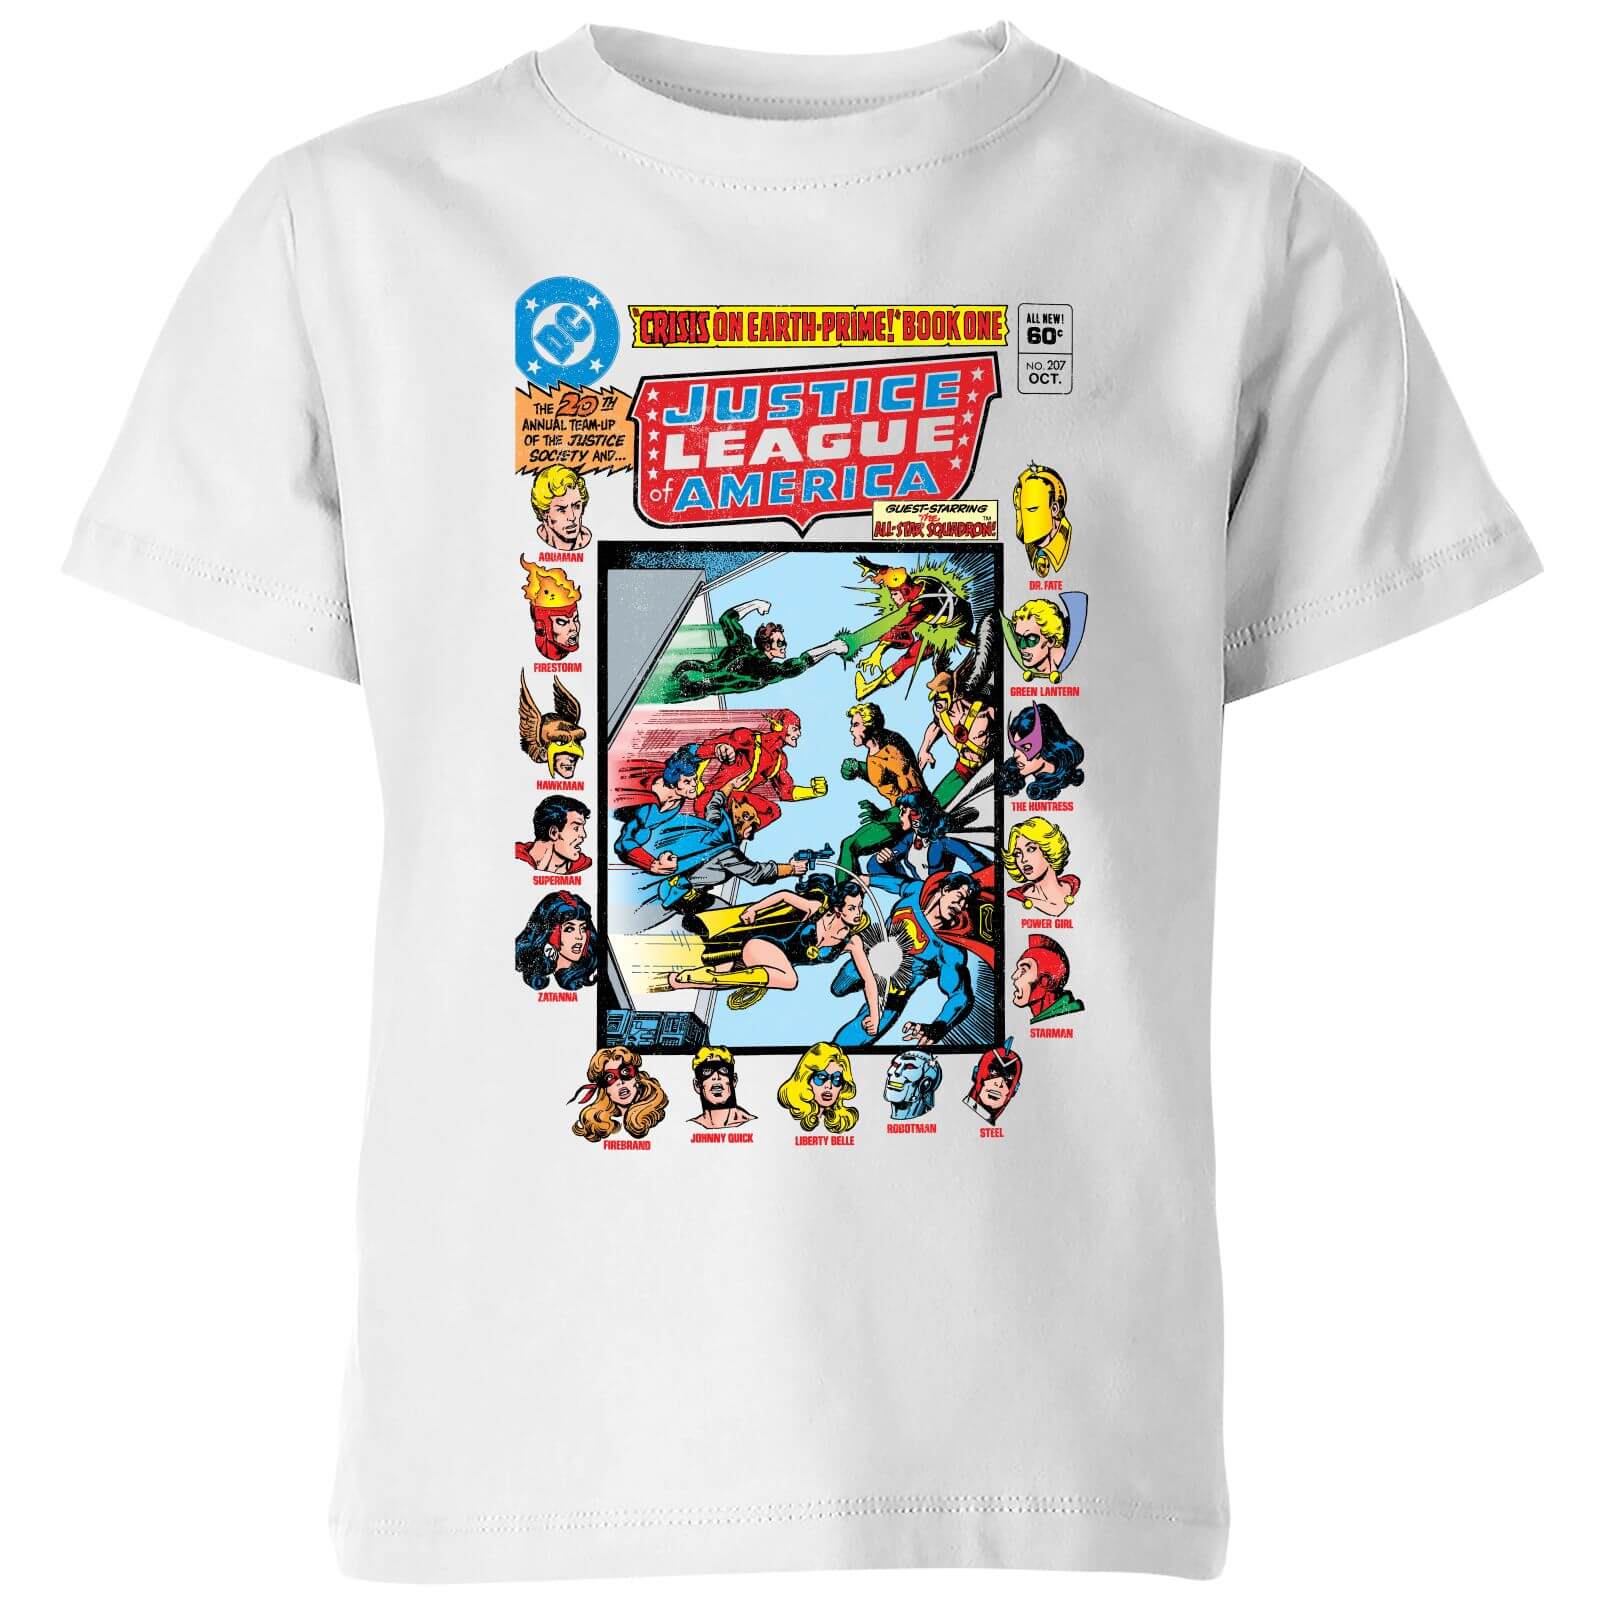 DC Comics Justice League Crisis On Earth-Prime Cover Kids' T-Shirt - White - 9-10 Years - White